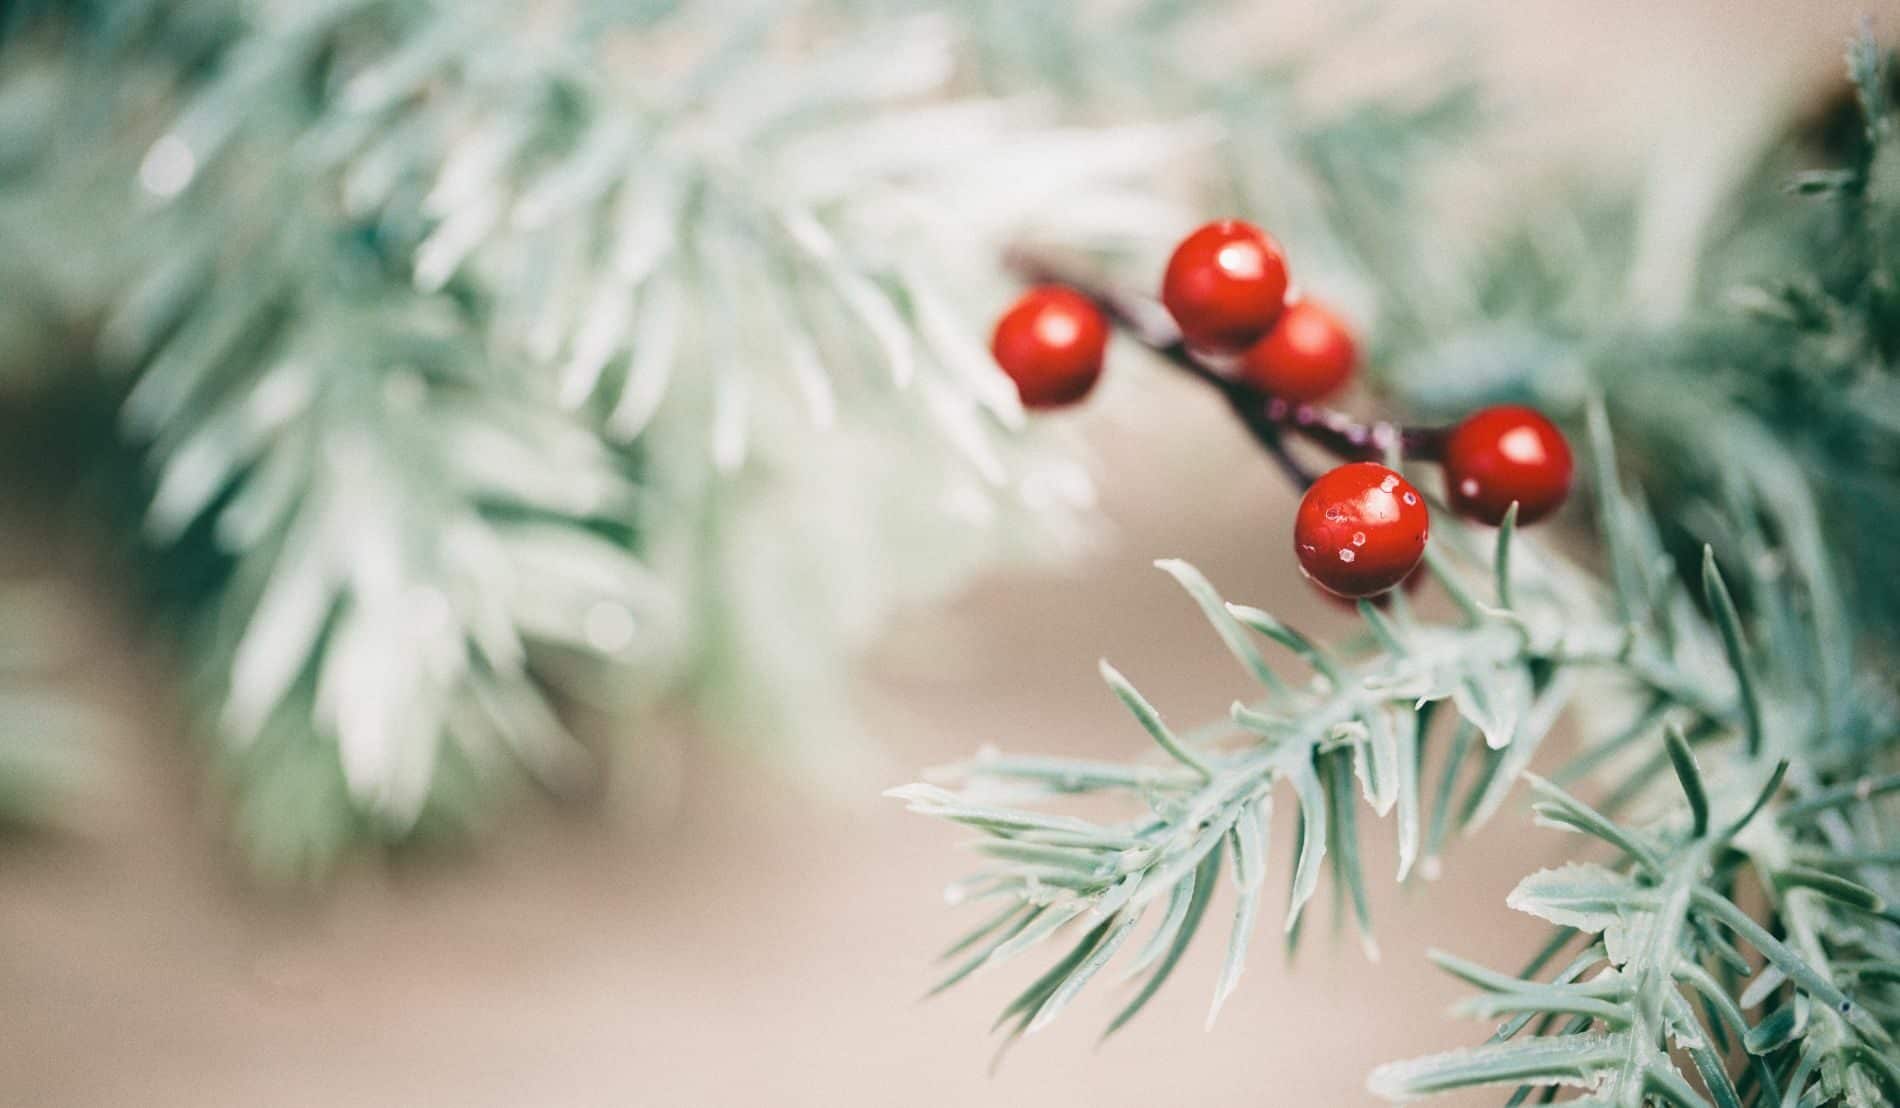 A spruce tree with a sprig of red holiday berries.